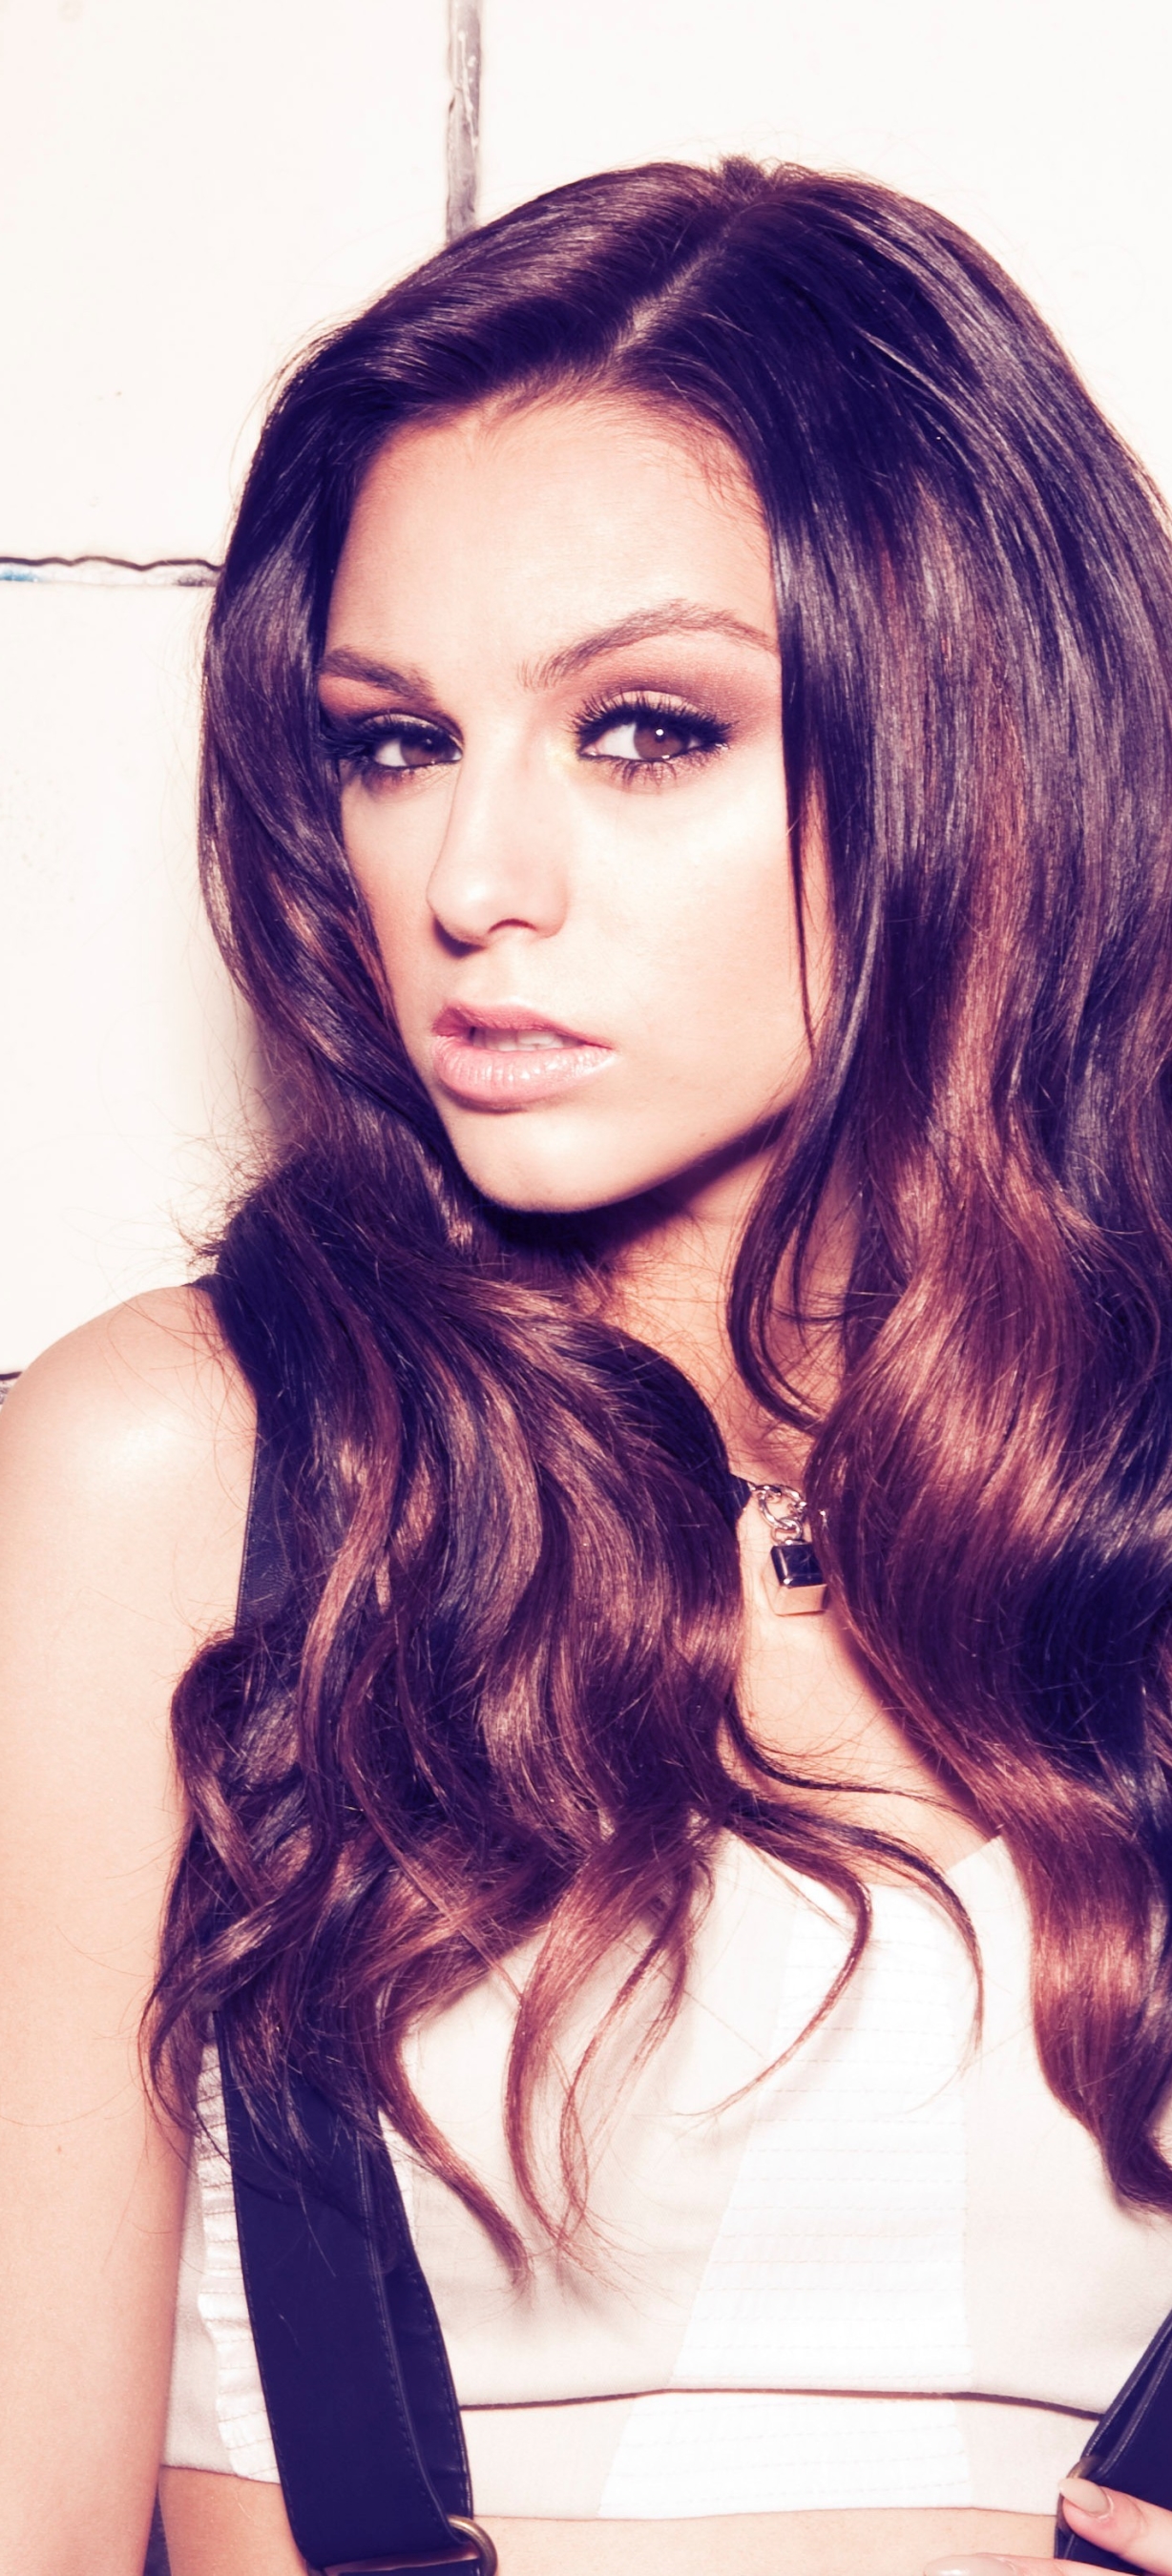 Music Cher Lloyd Mobile Abyss